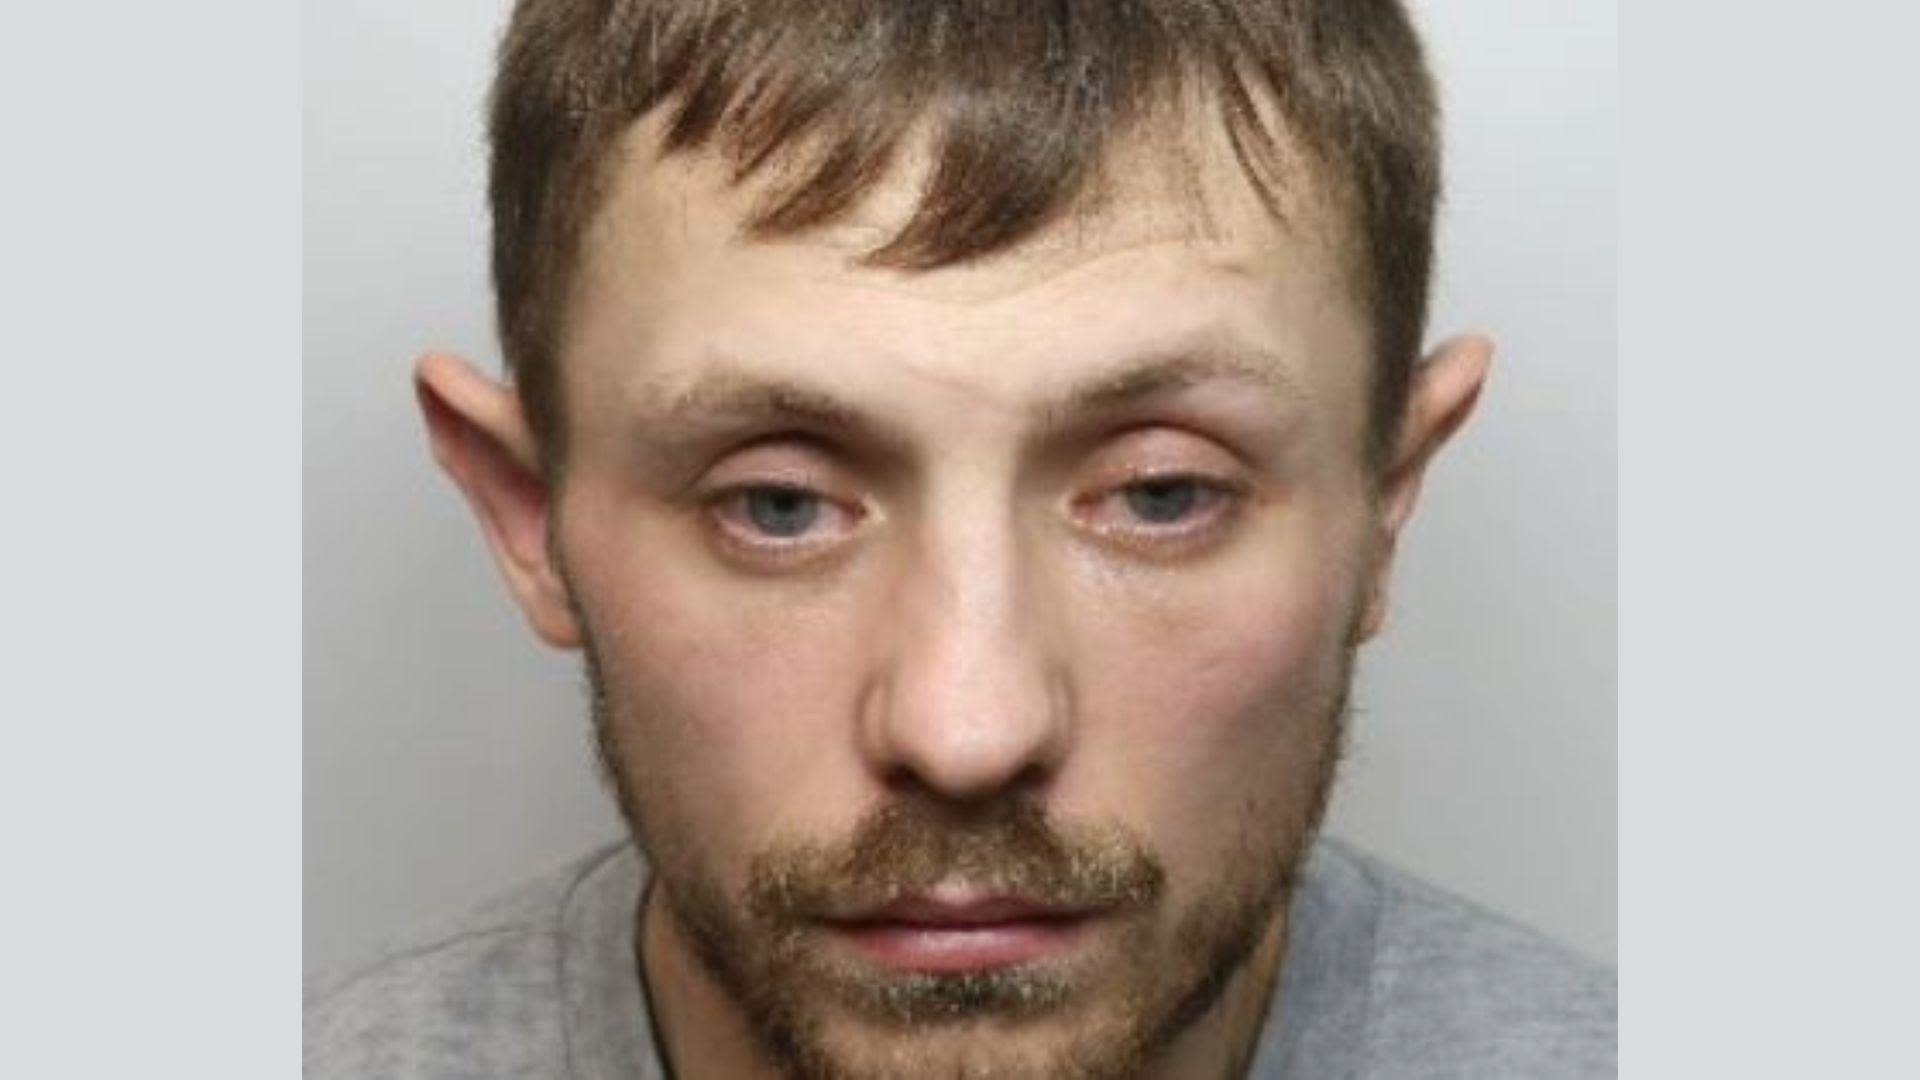 Man jailed following series of violent attacks